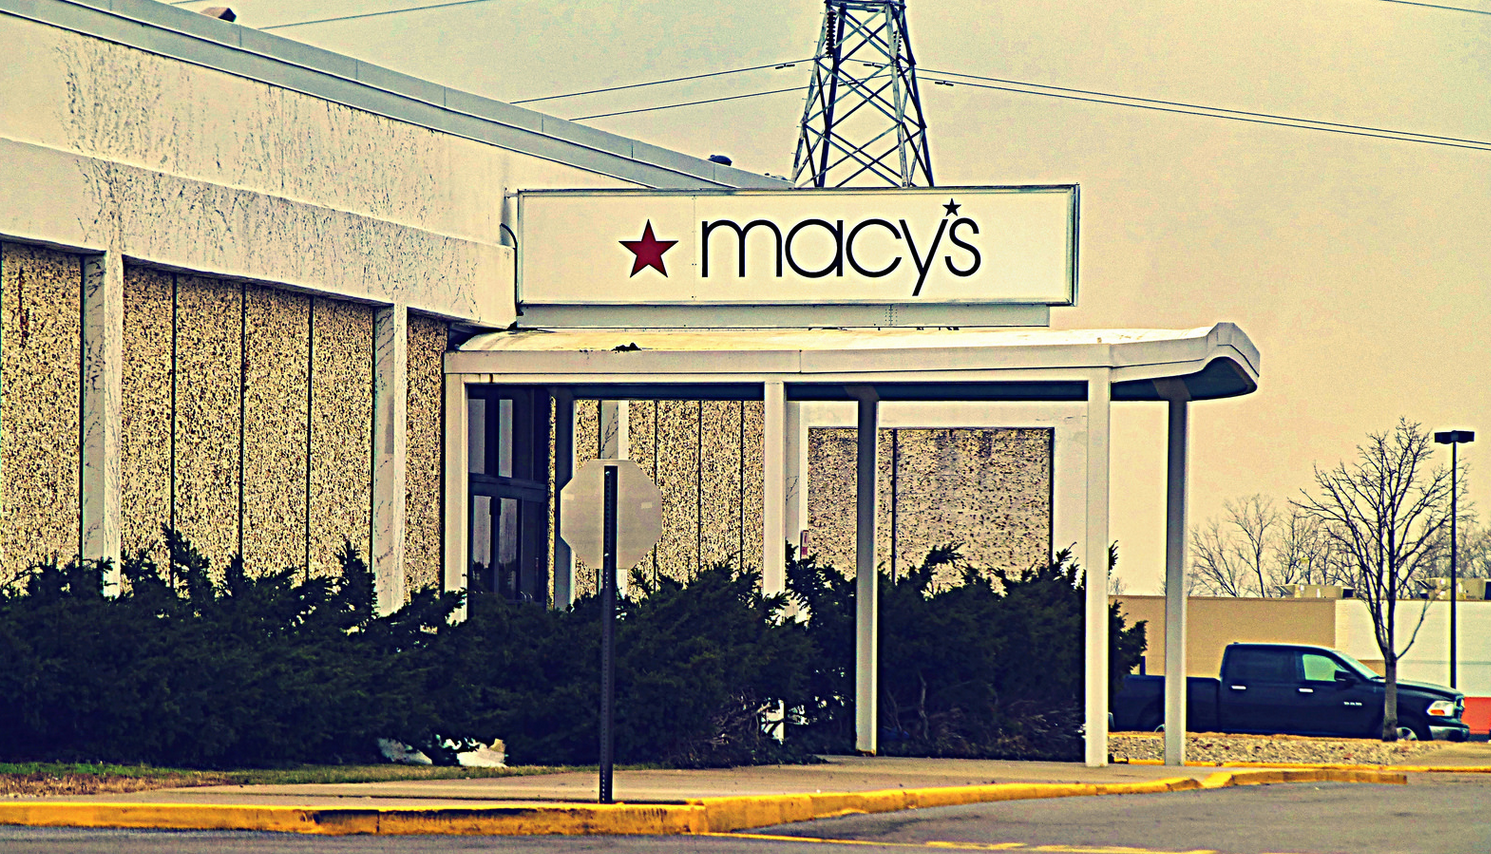 Macy’s Will Have Fewer Promotions With Coupons, Lower Clearance Prices